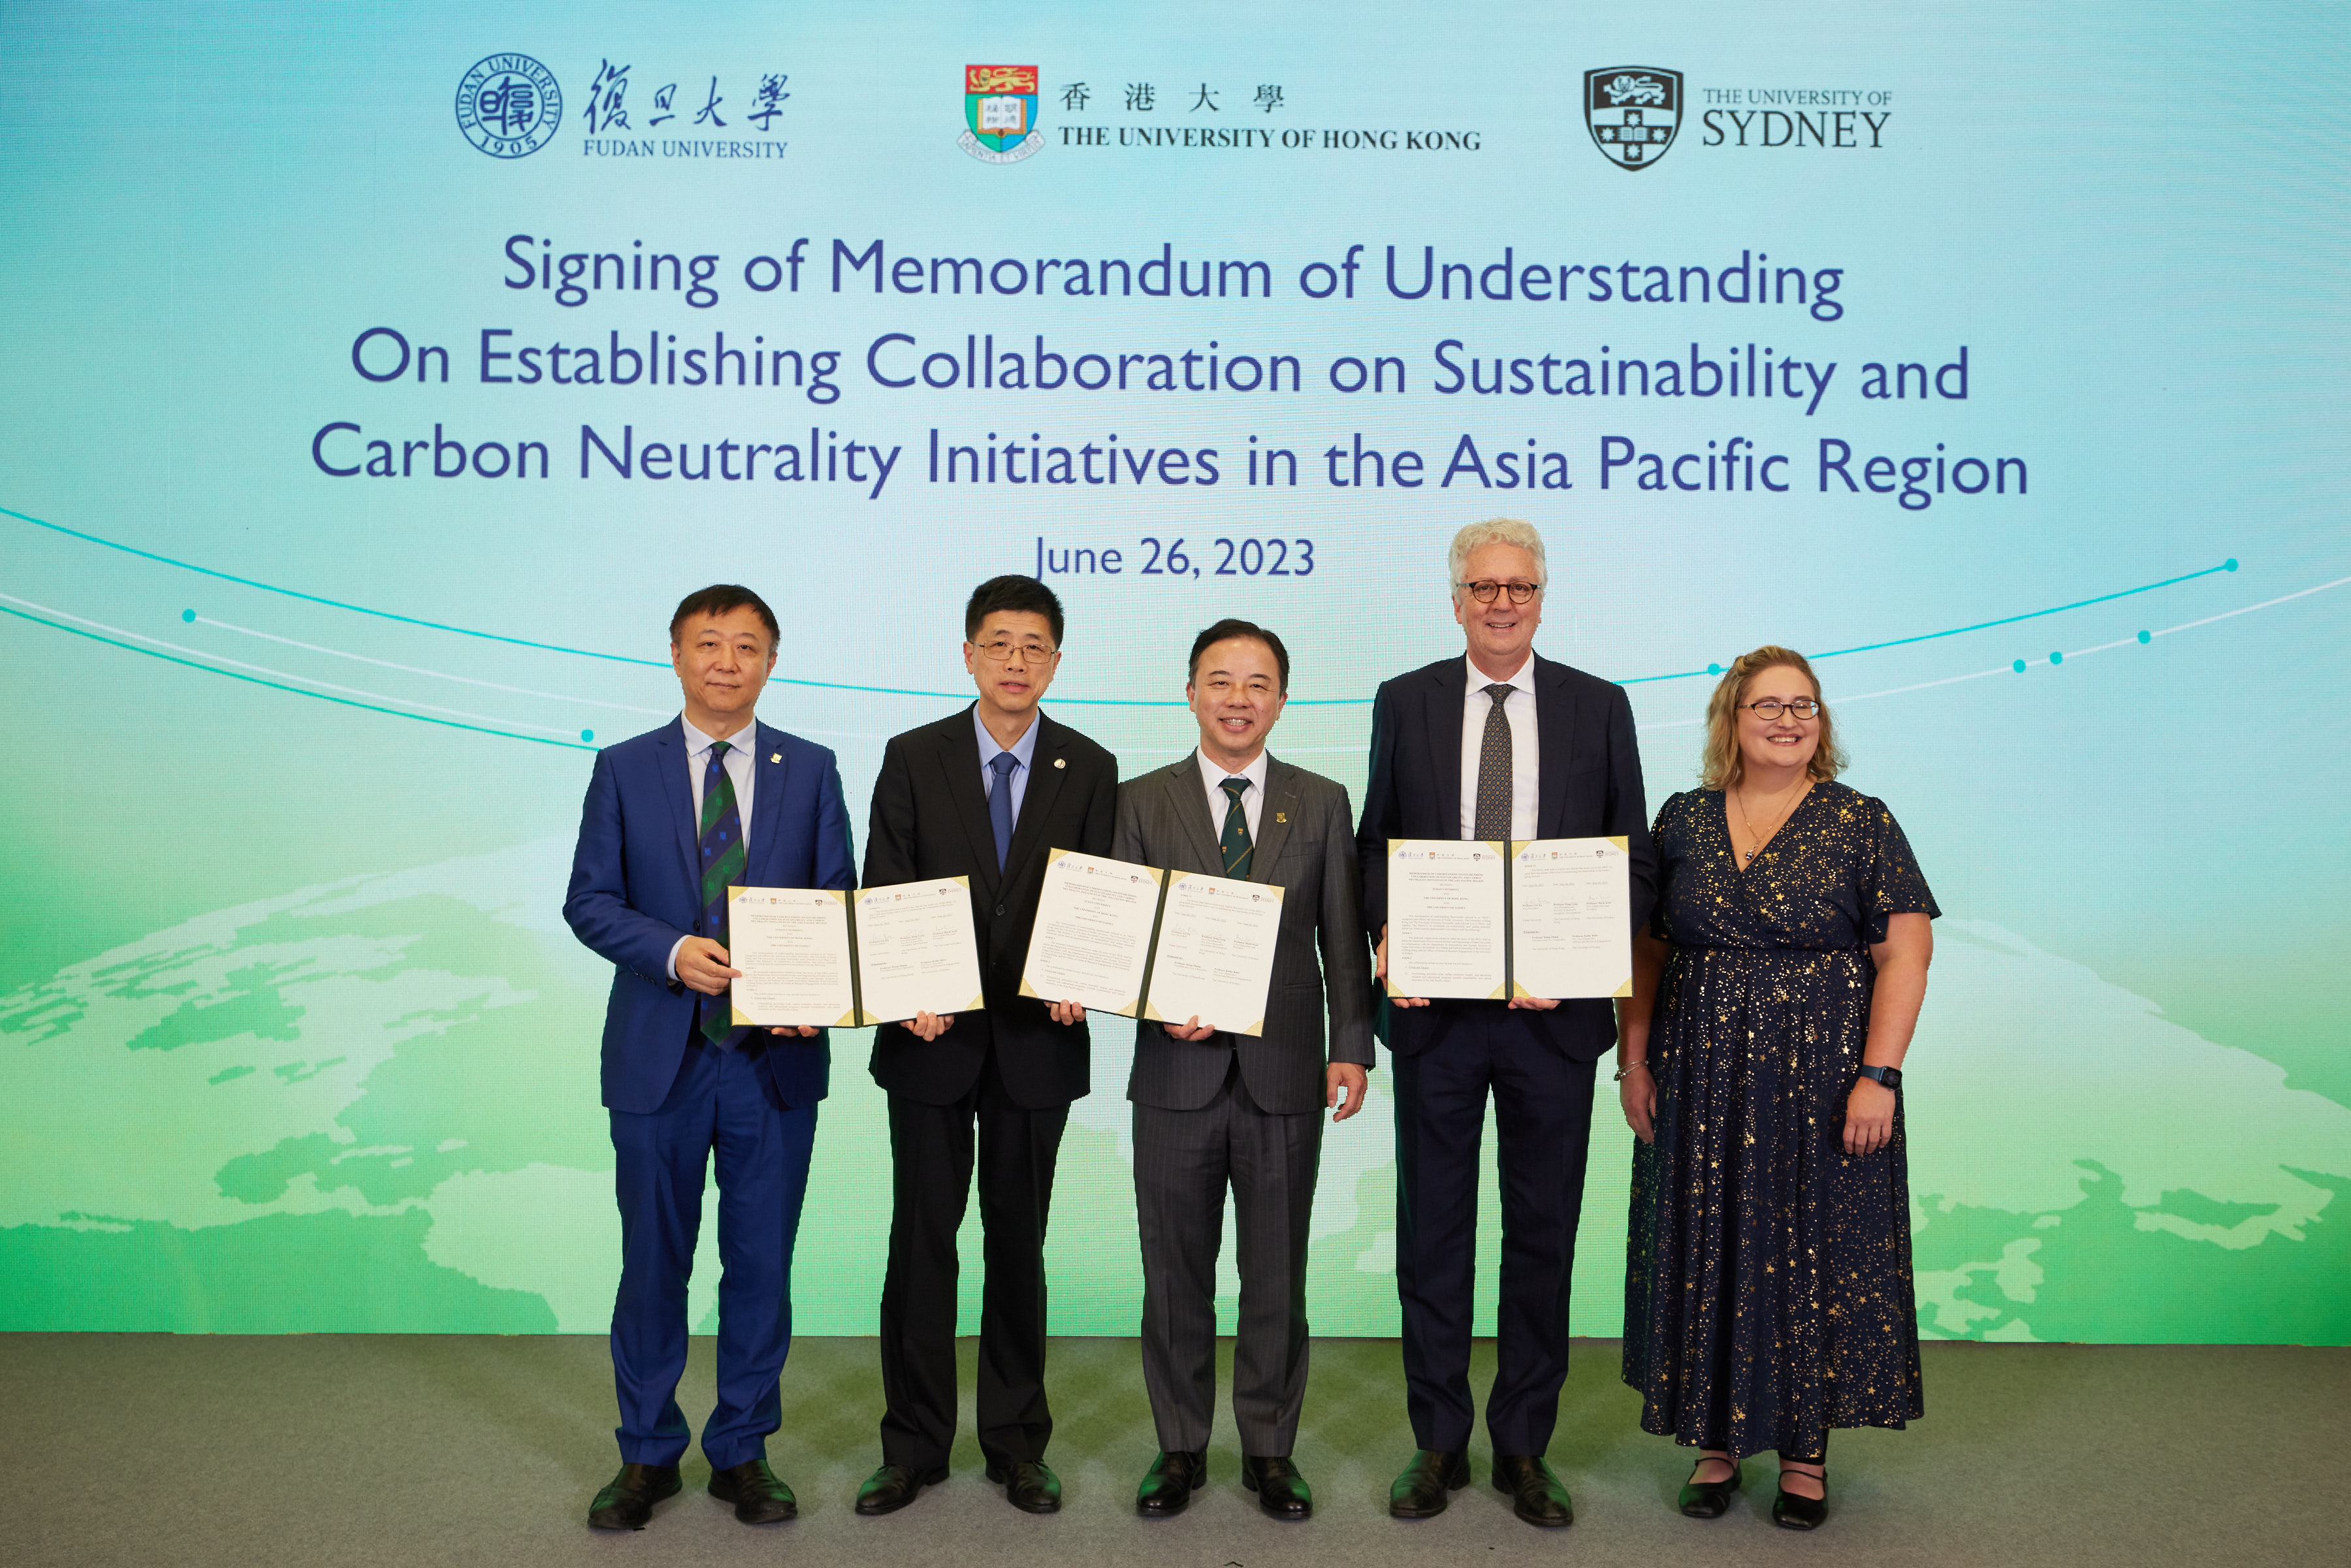 (From left) Professor Peng Gong, Vice-President (Academic Development) of HKU; Professor Lei Xu, Vice-President of Fudan U; Professor Xiang Zhang, President and Vice-Chancellor of HKU; Professor Mark Scott, Vice-Chancellor and President of U of Sydney; and Professor Kathy Belov, Vice-President (Global and Research Engagement) of U of Sydney